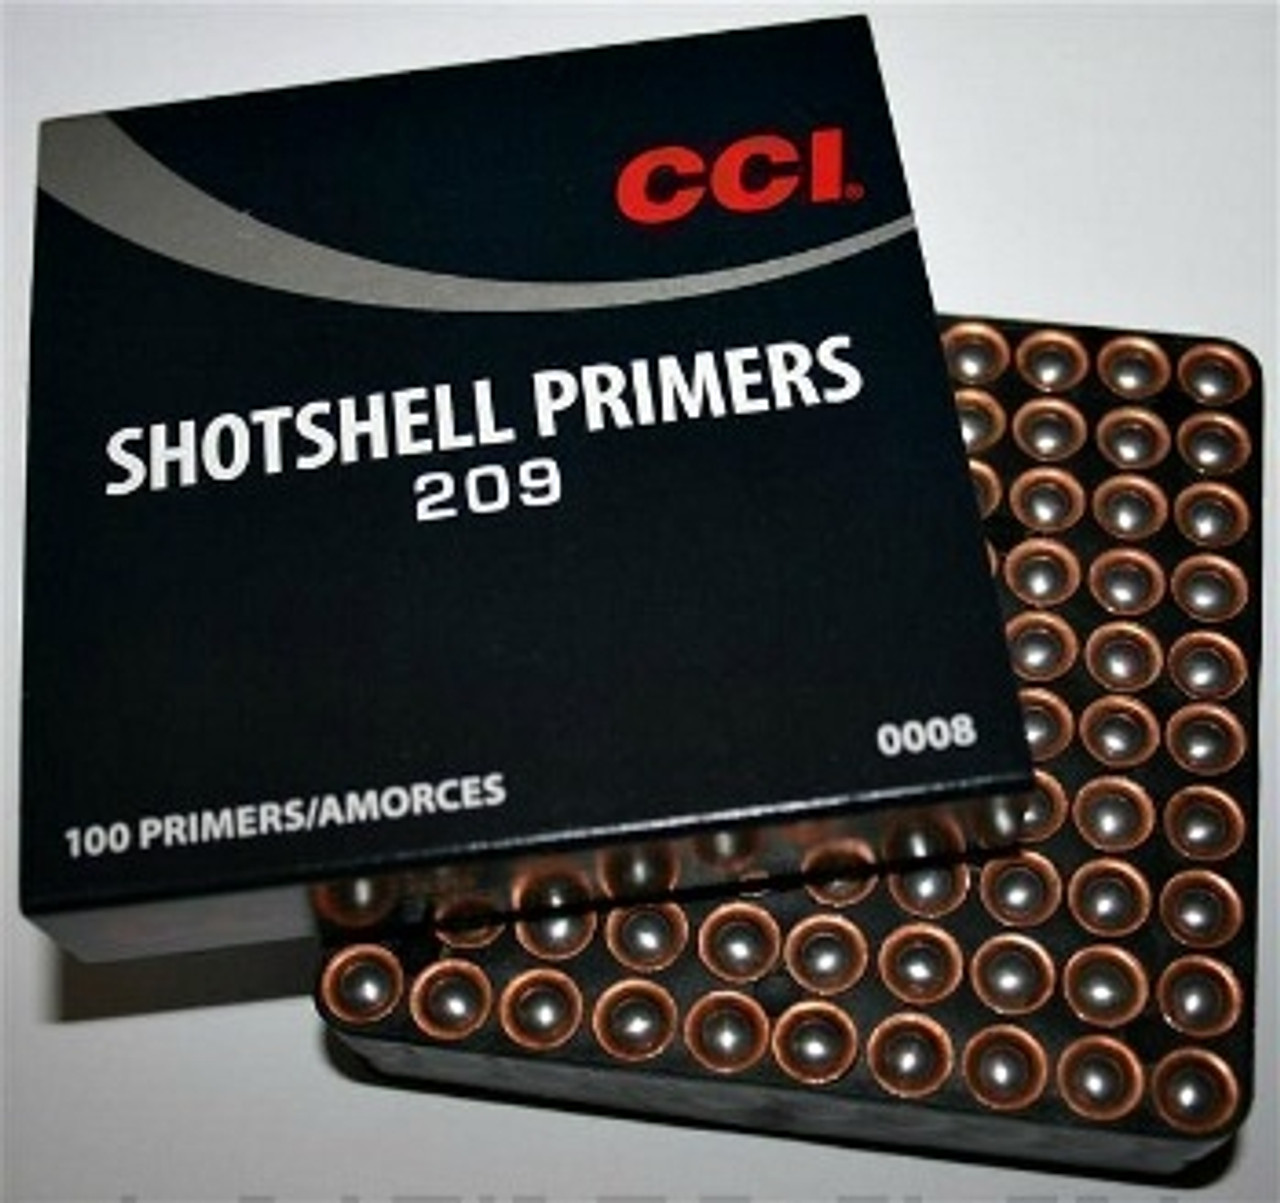 209 primers for club starter pistols for trials